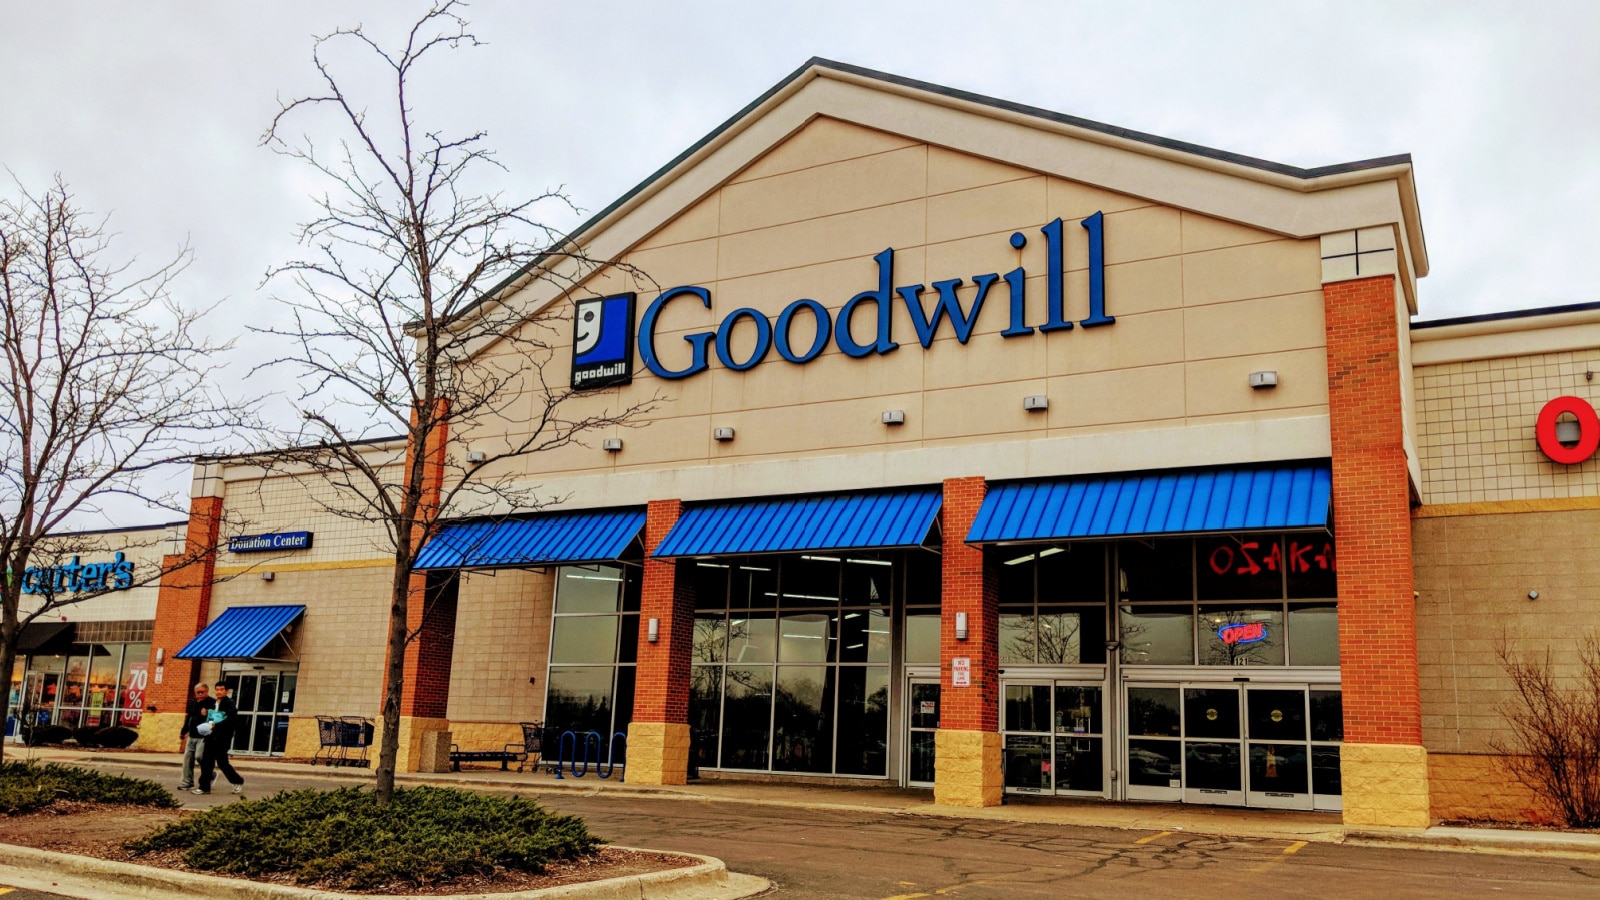 Bollingbrook, IL - April 11, 2018: Goodwill store location in the Chicago suburbs.